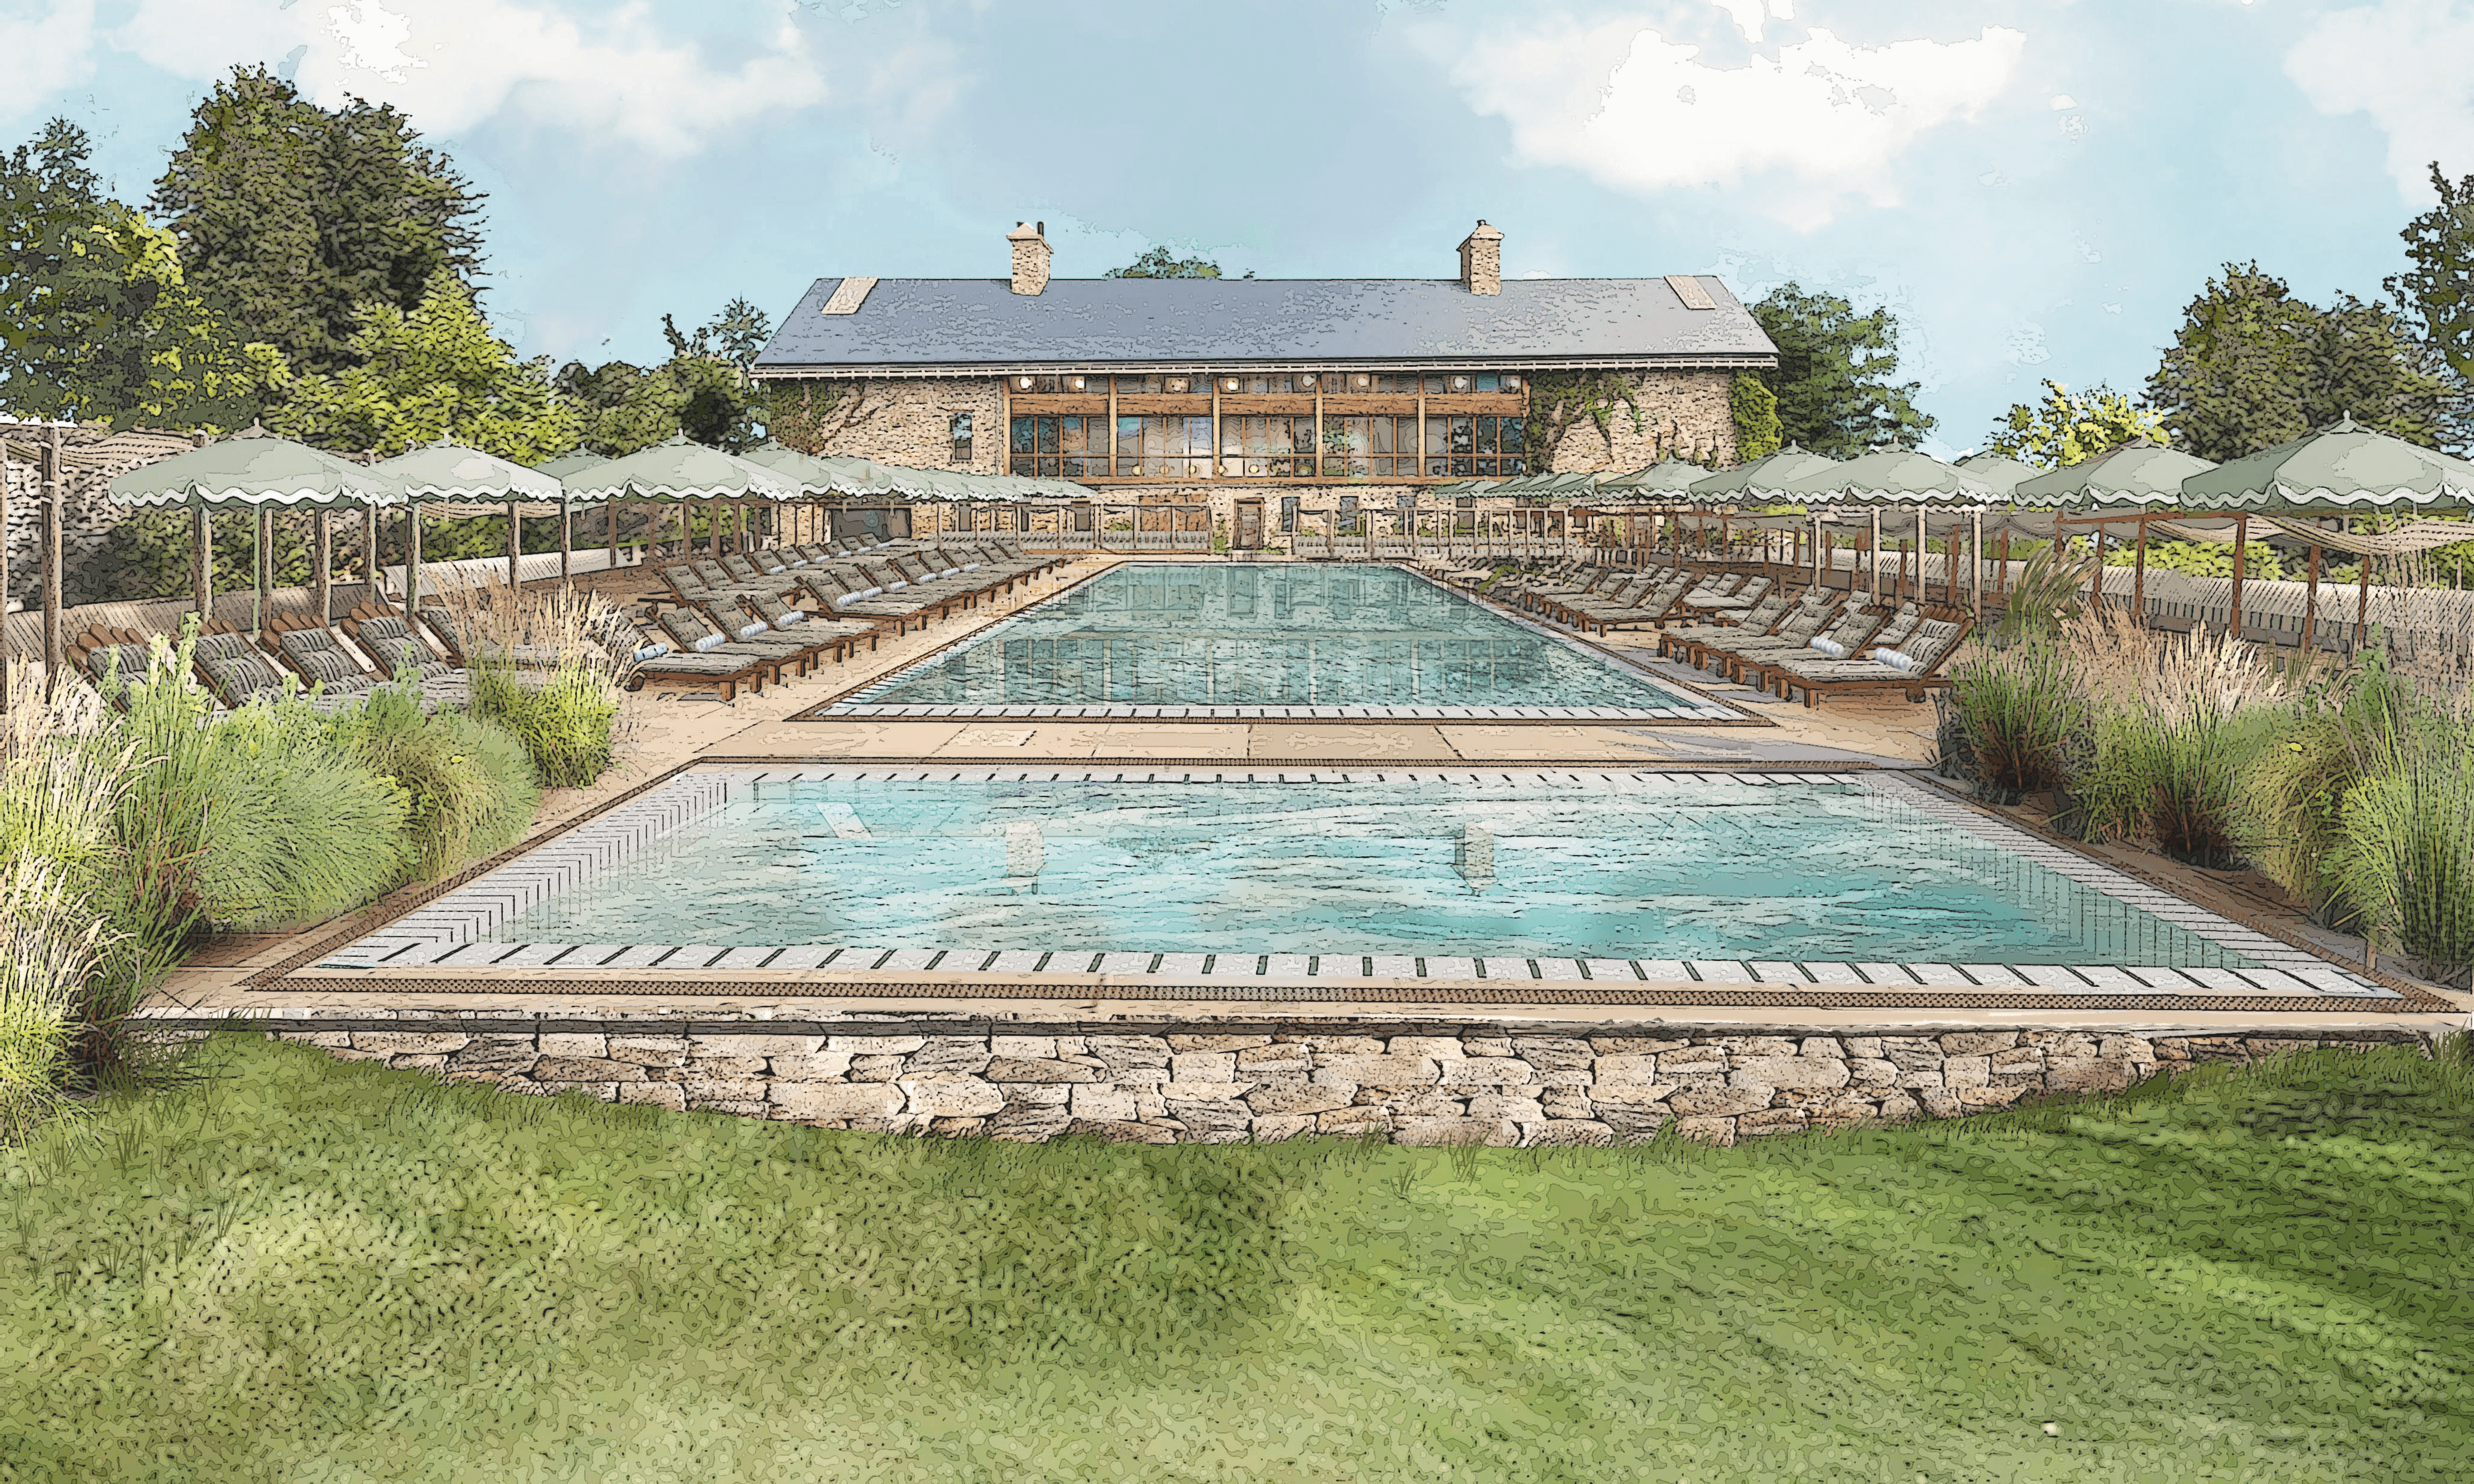 Rendering of Soho House countrywide retreat